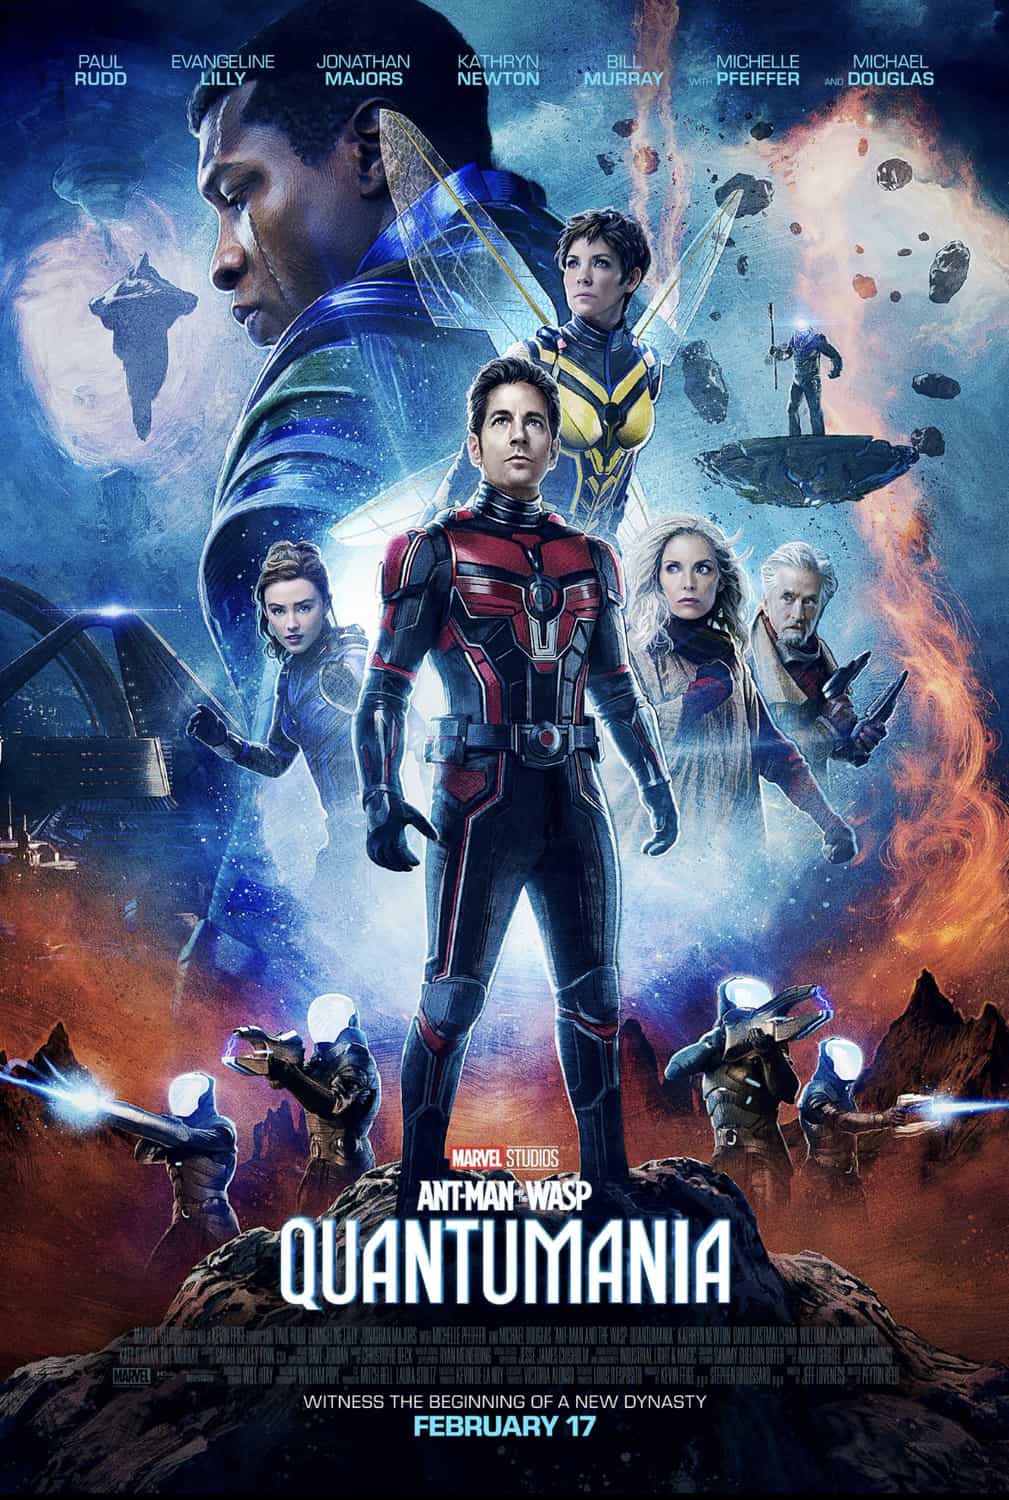 Global Box Office Weekend Report 24th - 26th February 2023:  Ant-Man 3 remains at the top of the global box office for a second weekend with Cocaine Bear the top new movie at 2